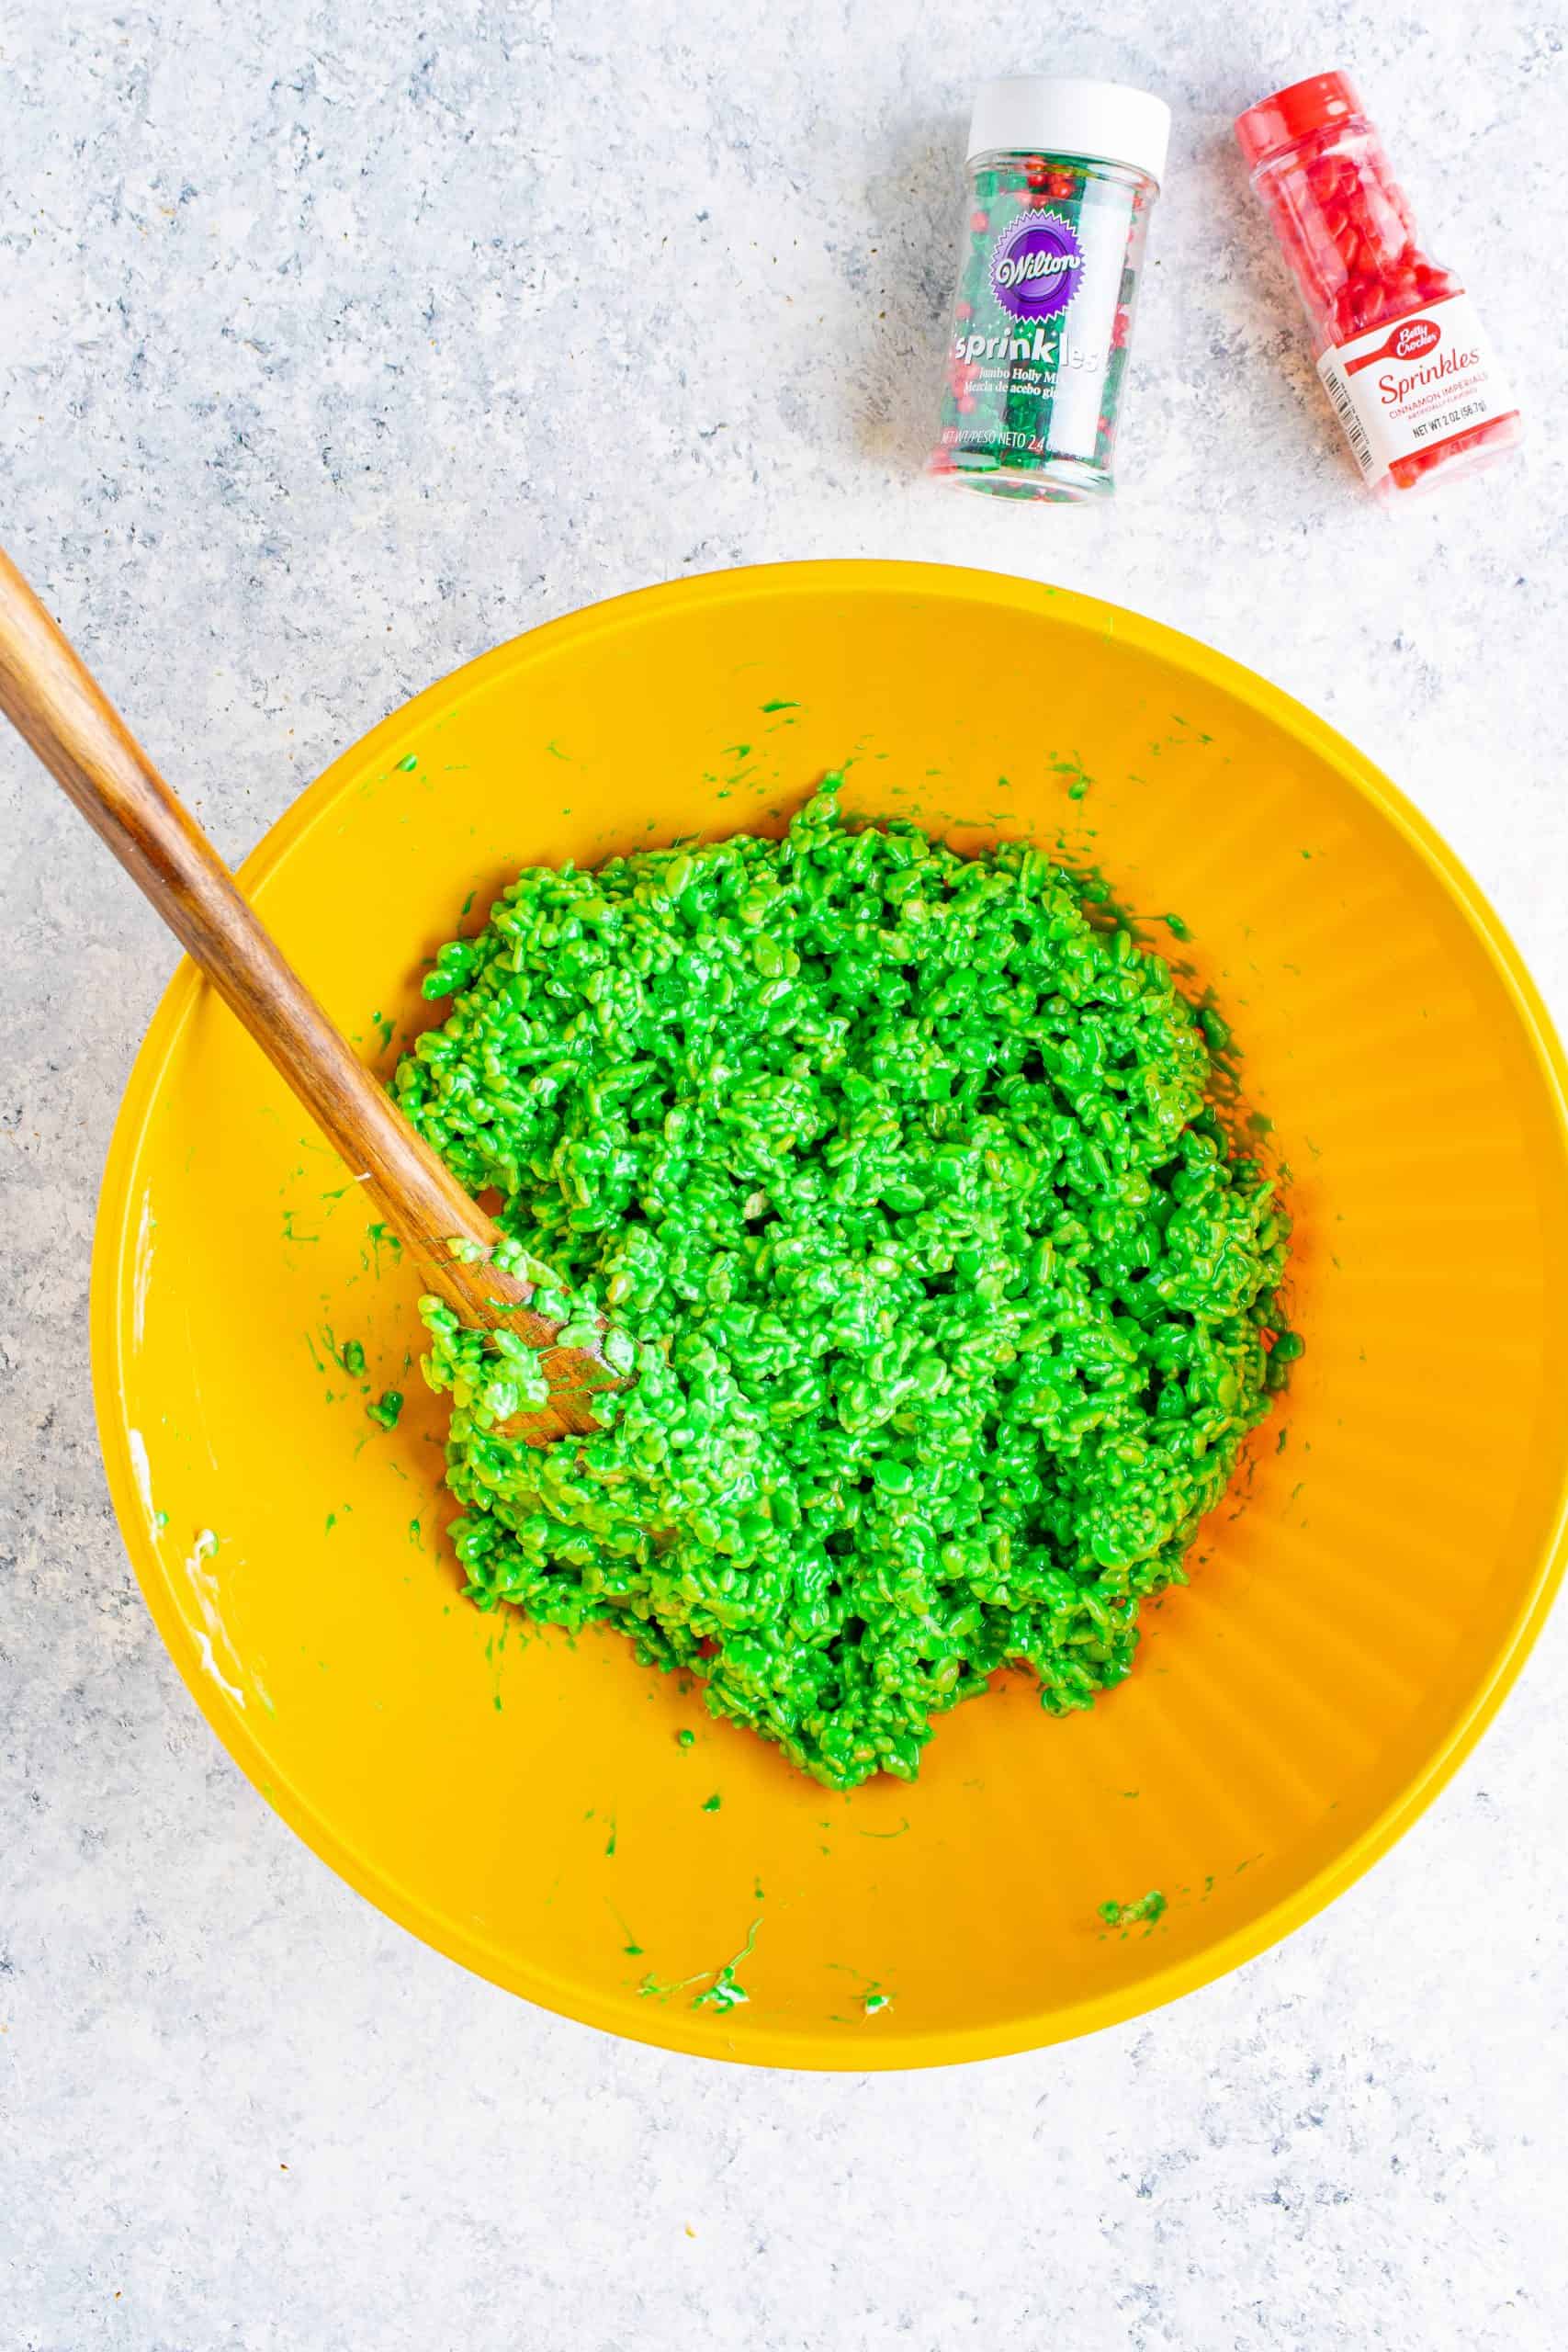 green rice krispies cereal in a large yellow bowl and a wooden spoon.